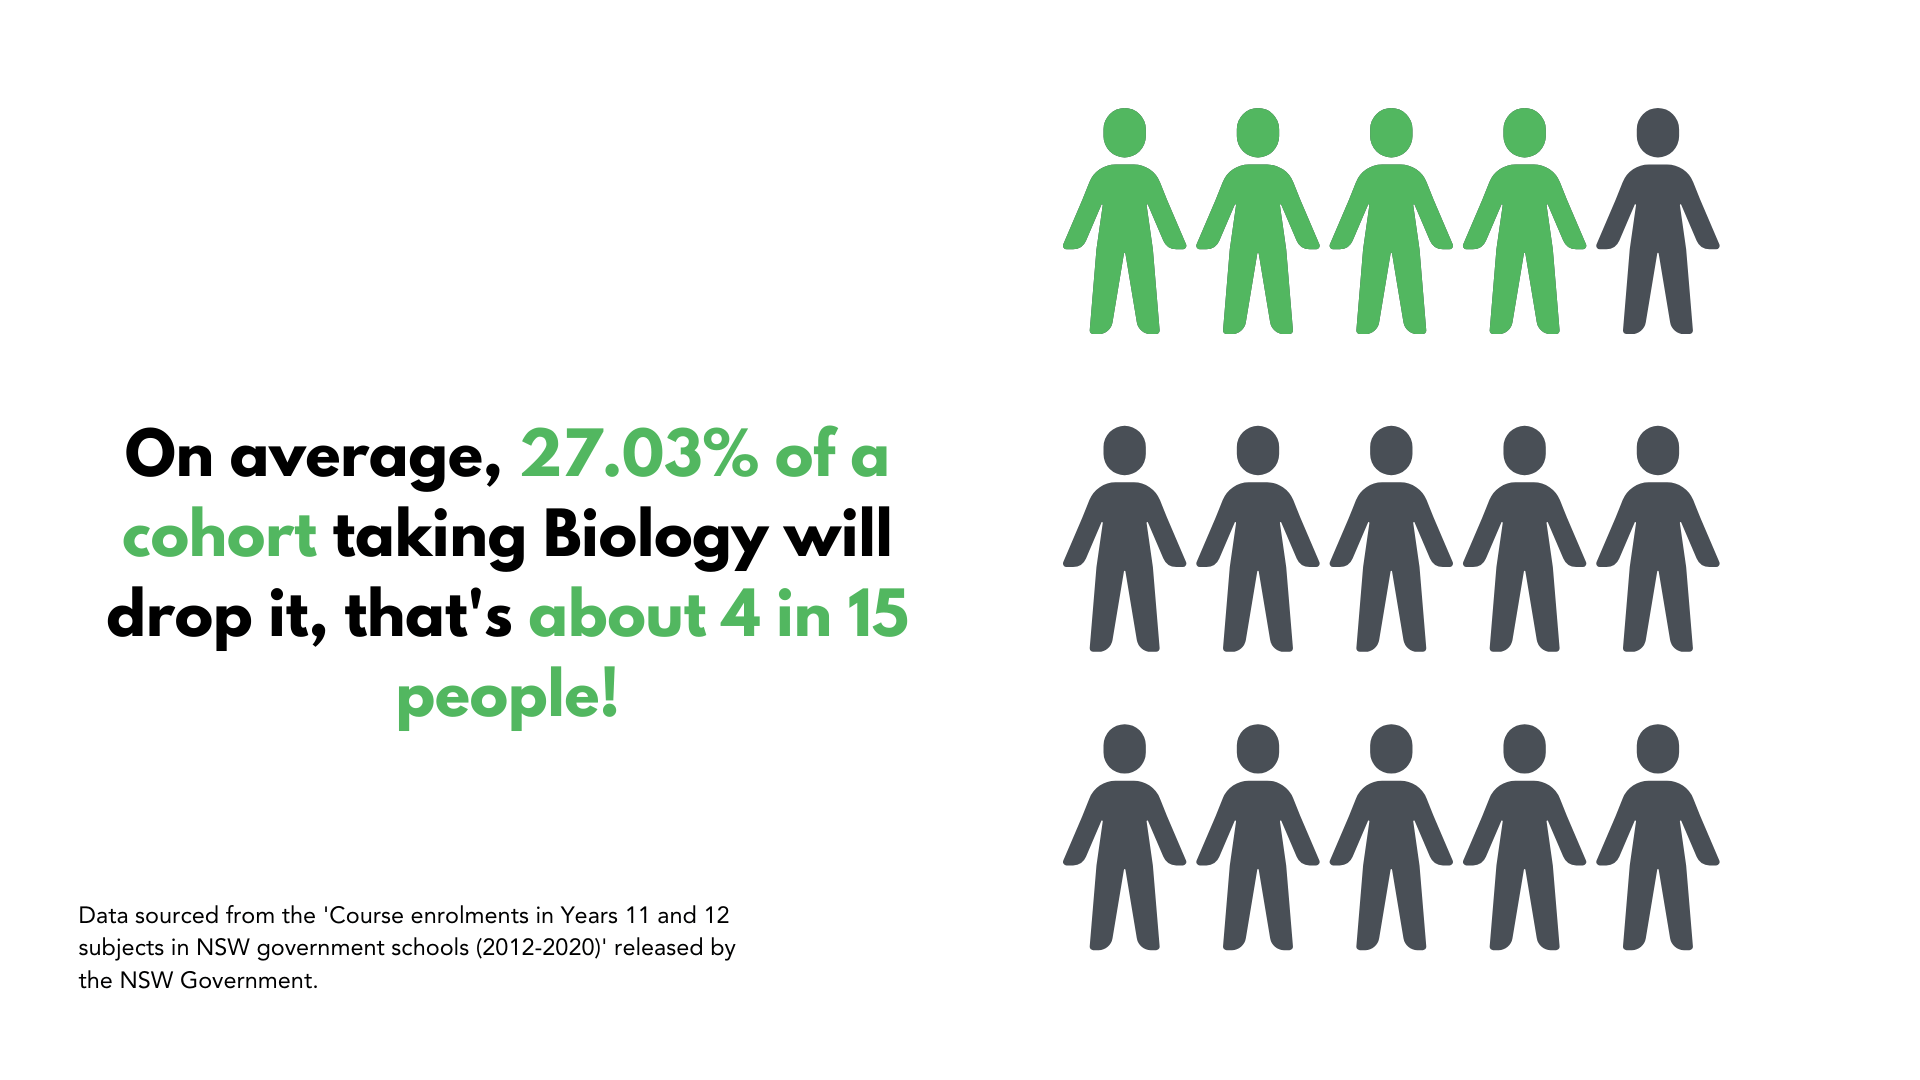 How many people drop Biology